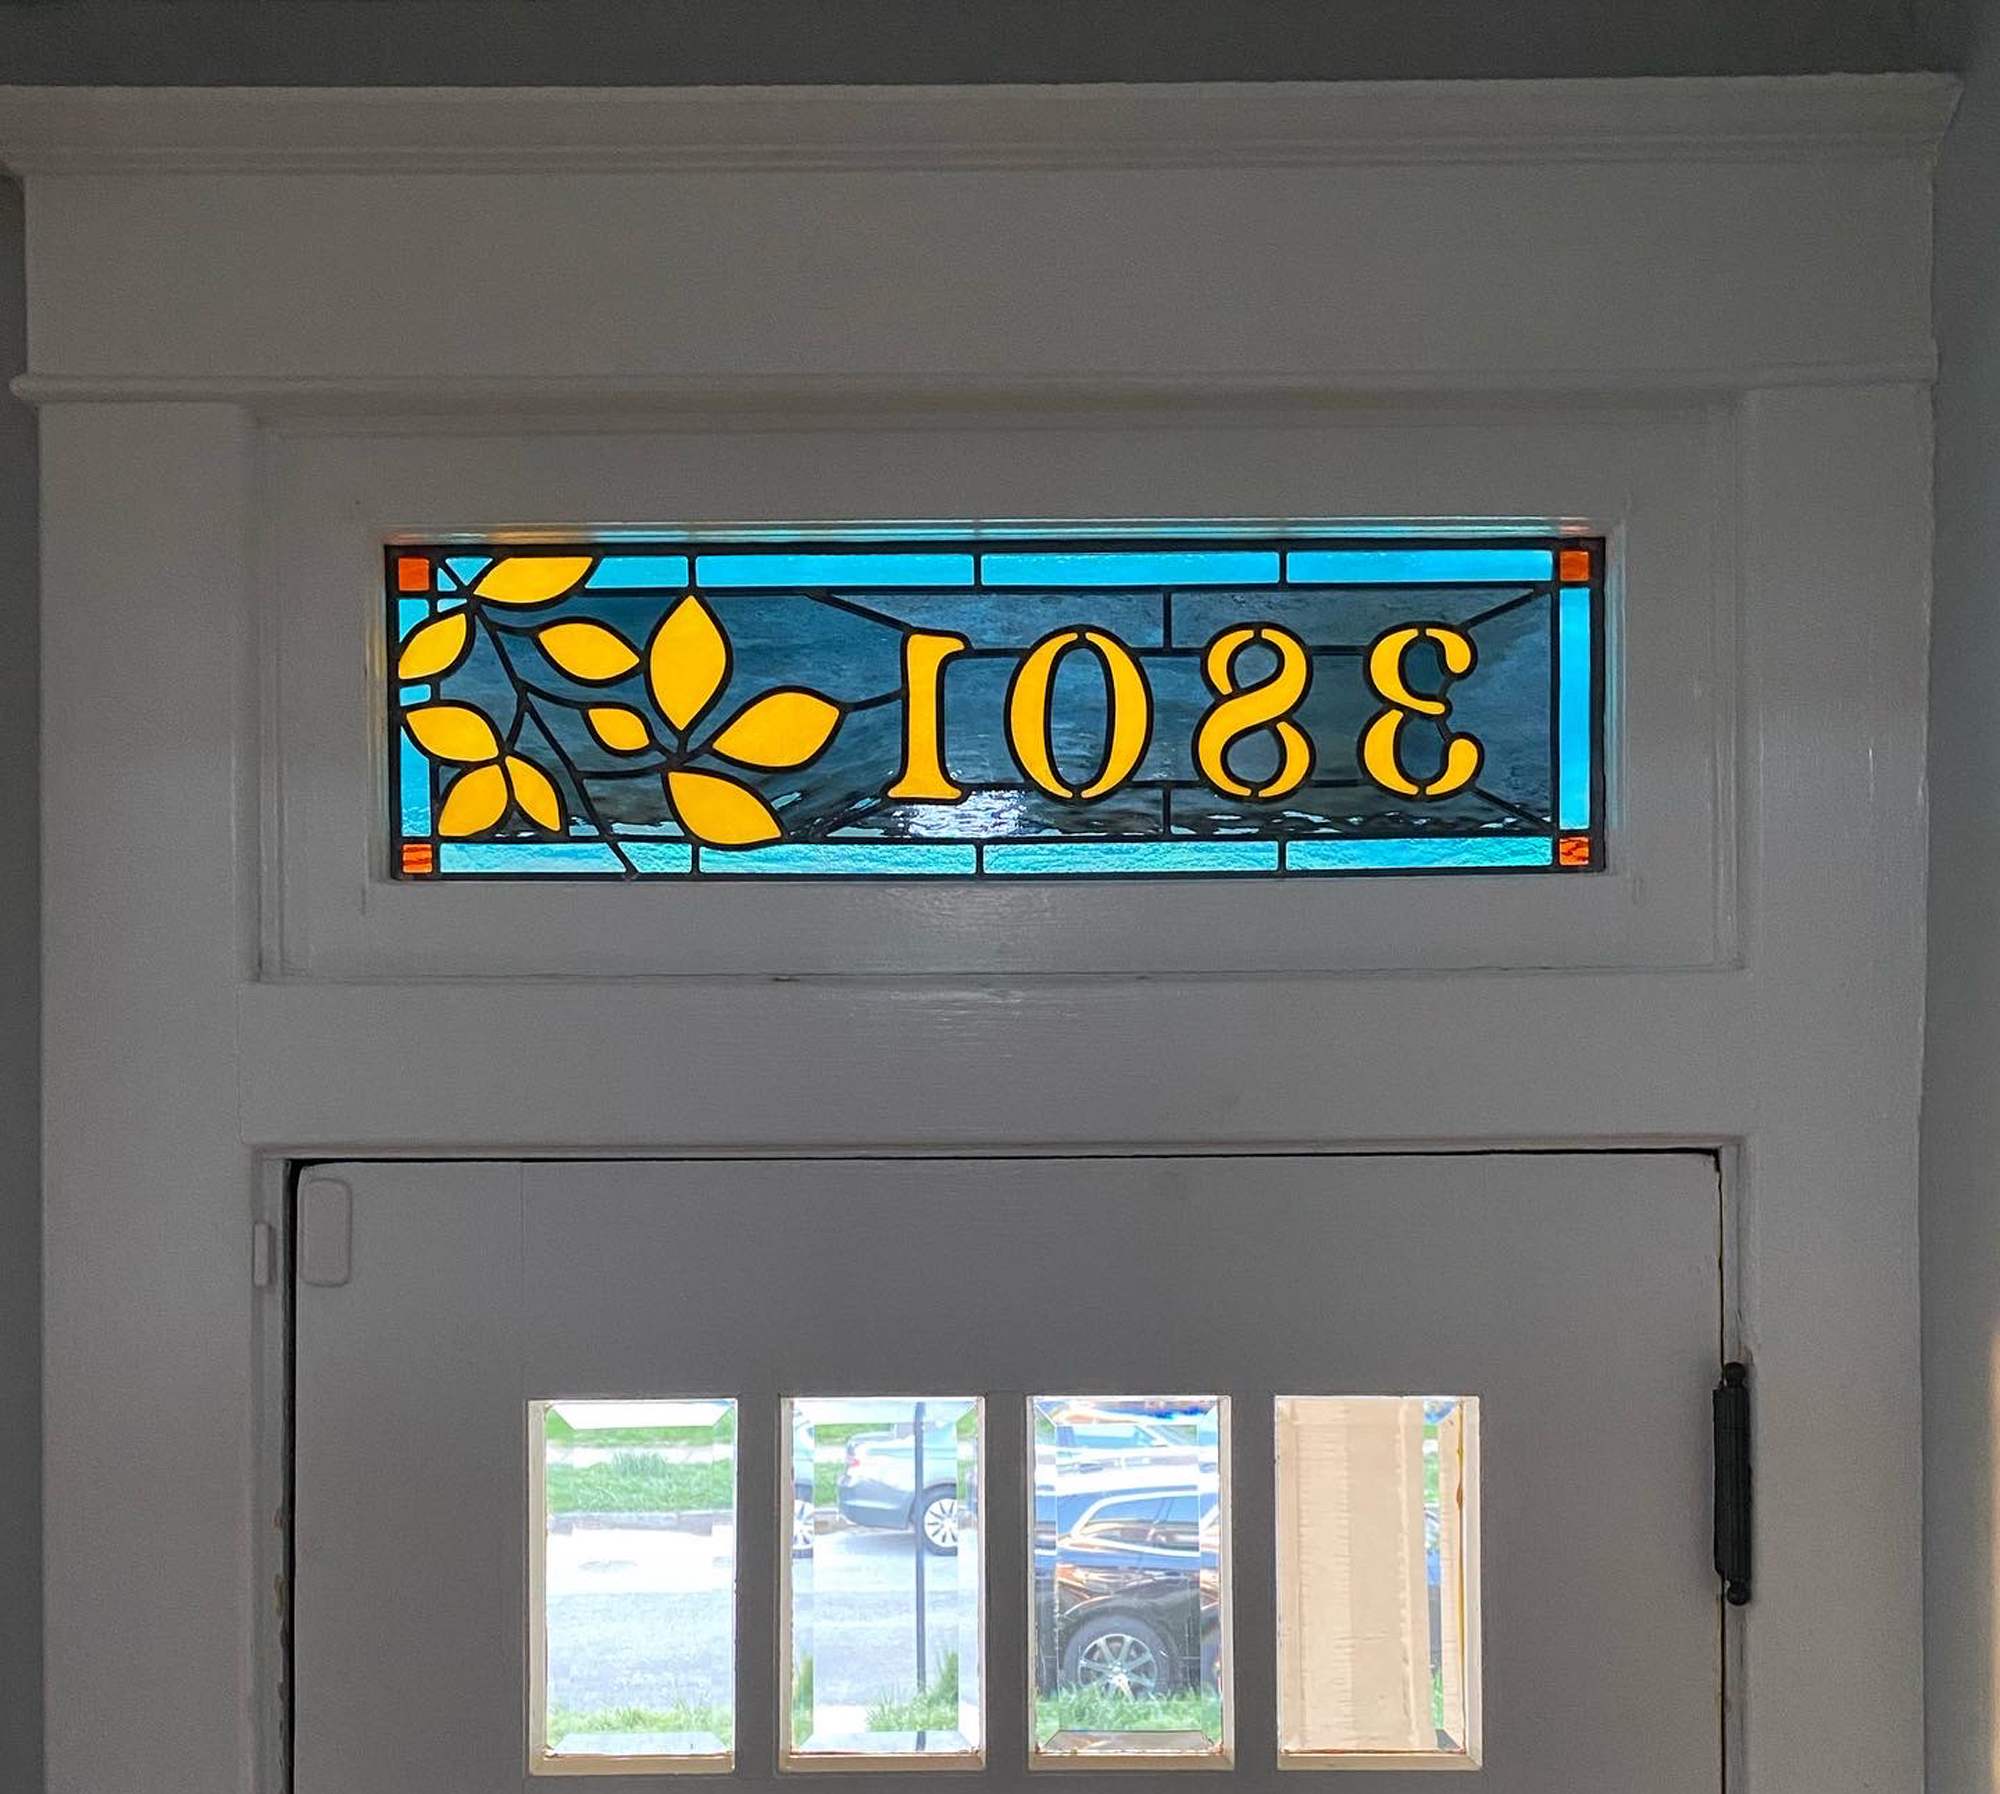 Stained glass transom with beech tree branch